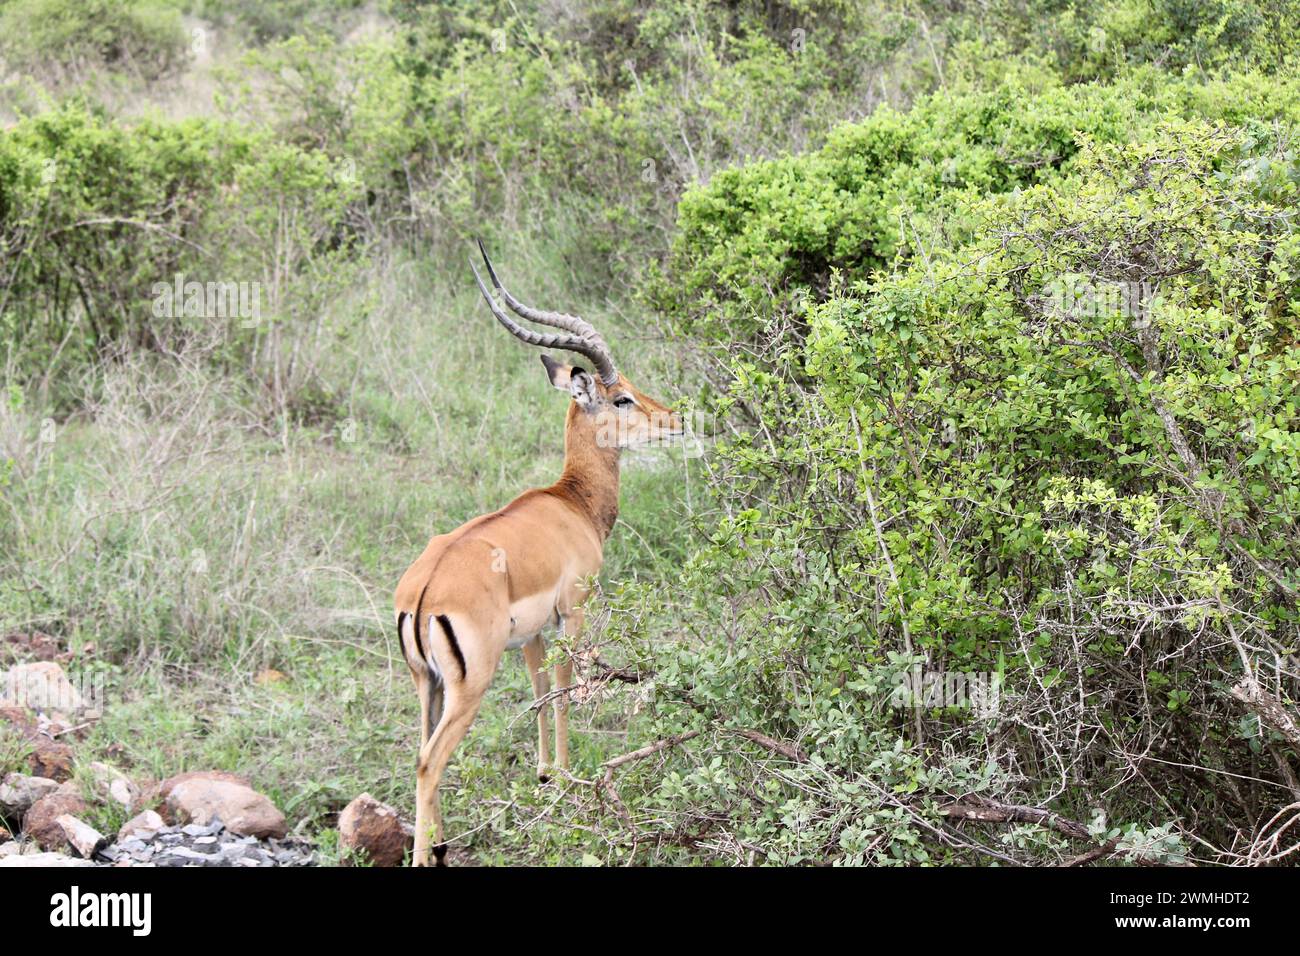 Medium-sized antelope found in eastern and Southern Africa Stock Photo